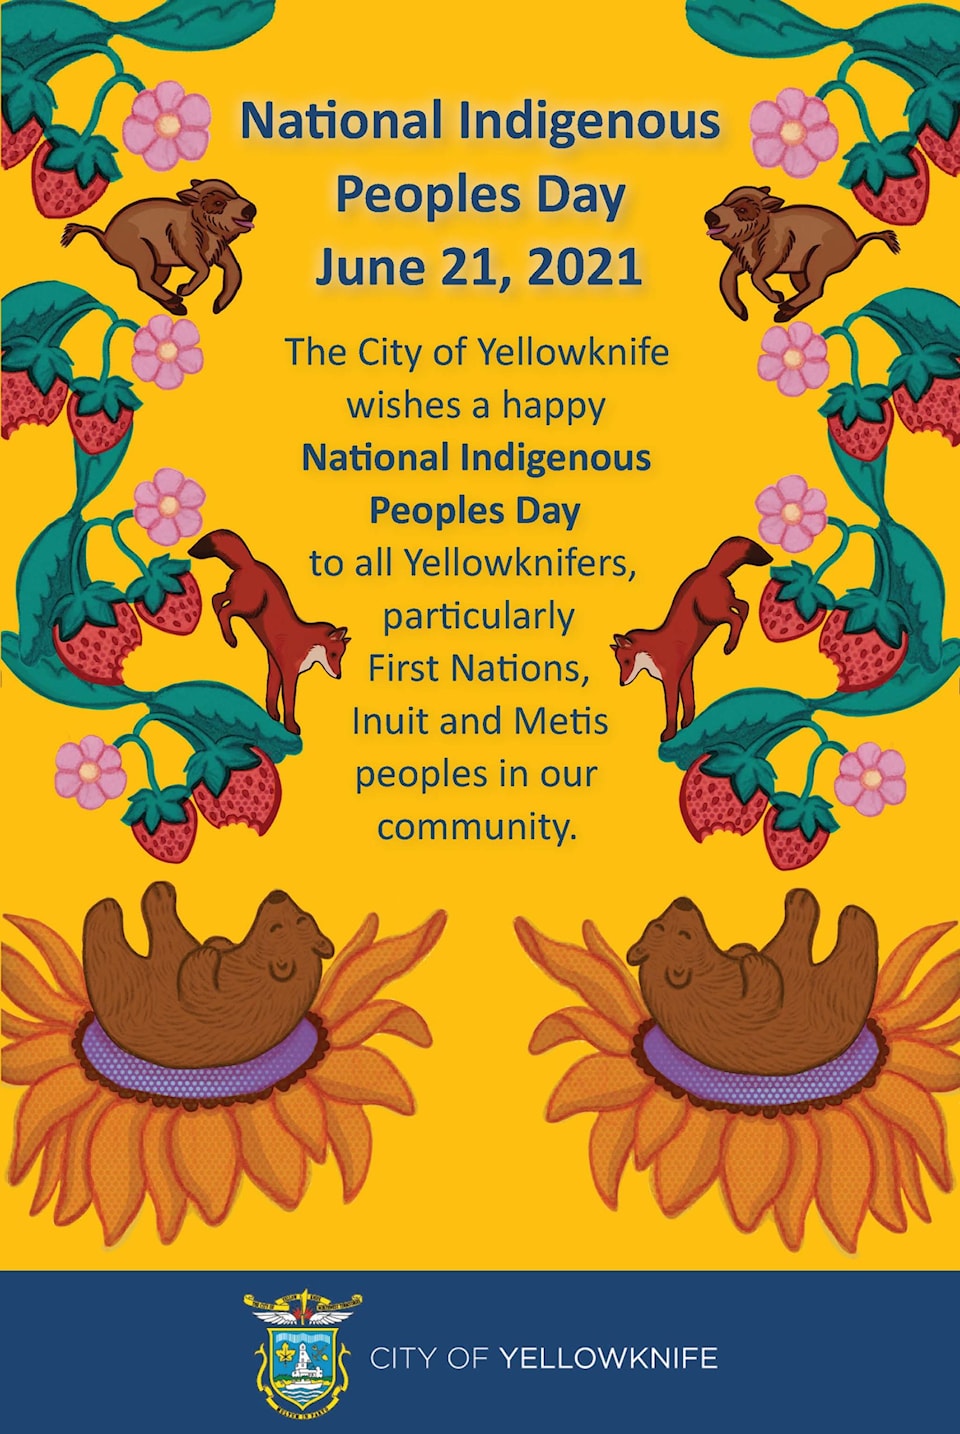 NATIONAL-INDIGENOUS-PEOPLES-DAY-2021-YELLOWKNIFER-AD